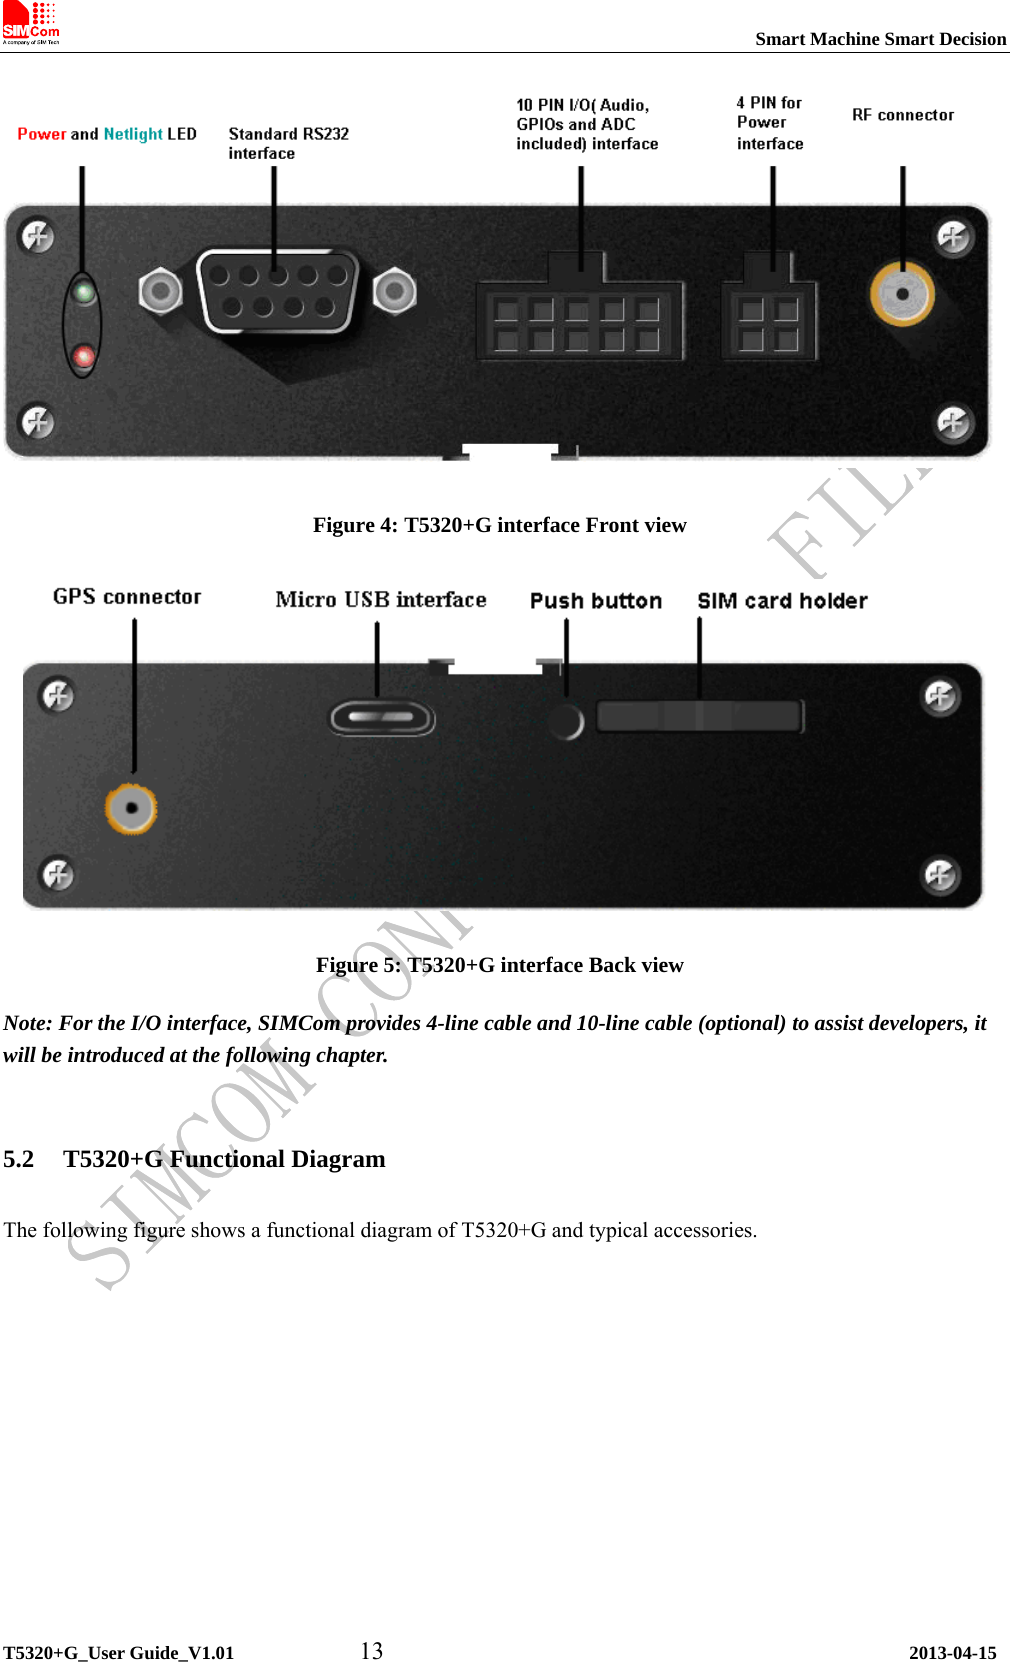                                                                           Smart Machine Smart Decision             T5320+G_User Guide_V1.01          13                                          2013-04-15  Figure 4: T5320+G interface Front view  Figure 5: T5320+G interface Back view Note: For the I/O interface, SIMCom provides 4-line cable and 10-line cable (optional) to assist developers, it will be introduced at the following chapter.  5.2 T5320+G Functional Diagram The following figure shows a functional diagram of T5320+G and typical accessories.  